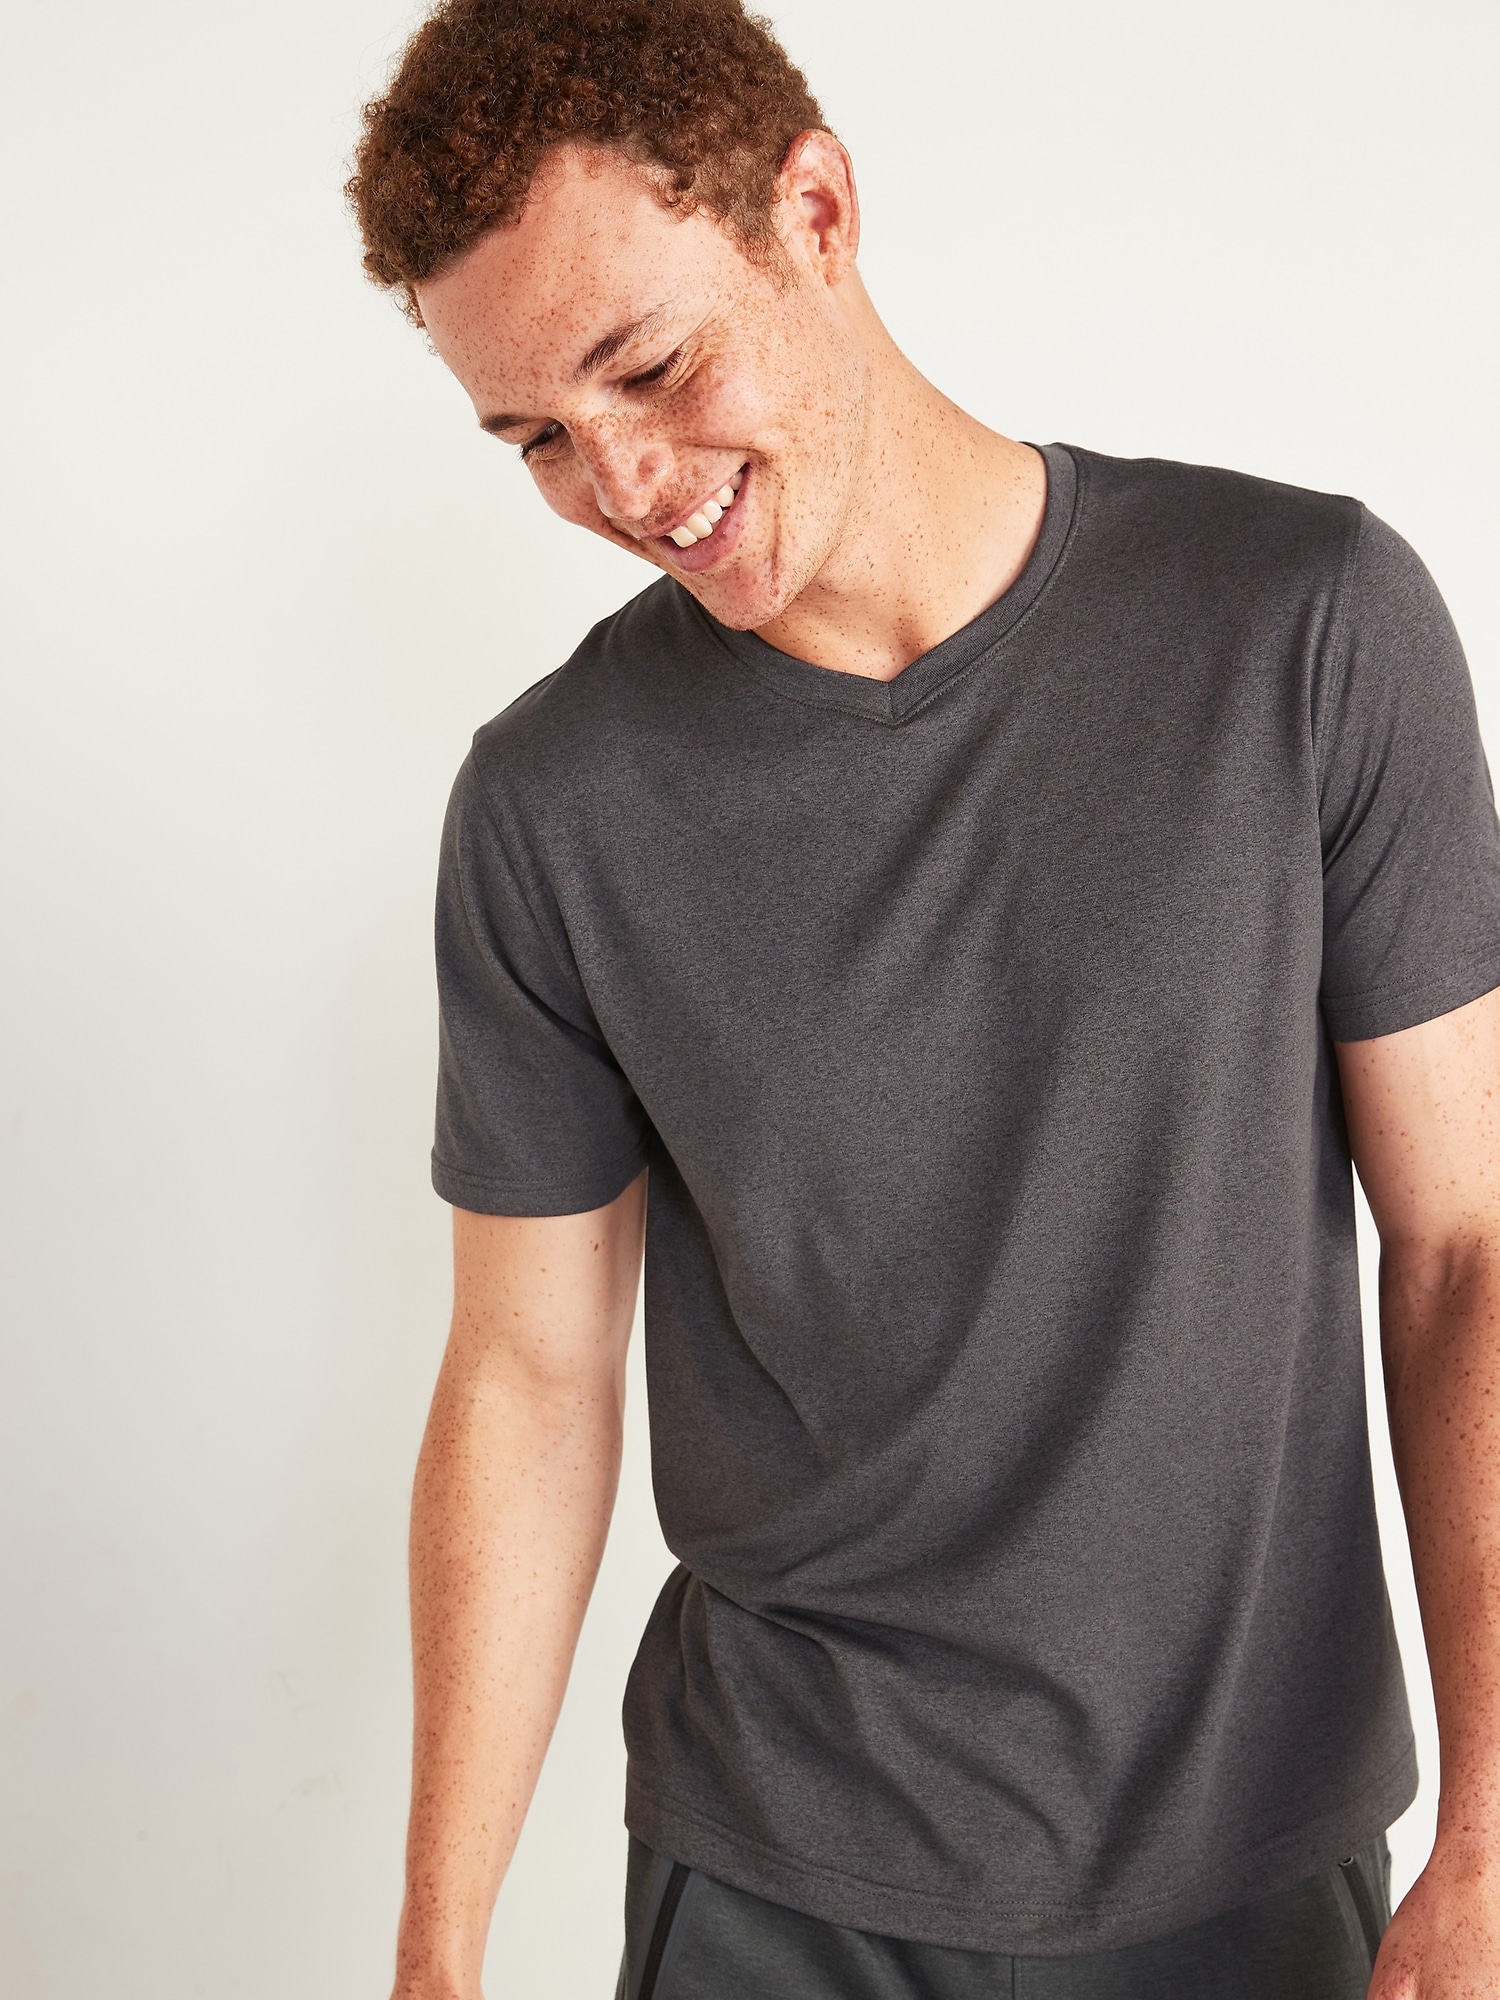 Go-Dry Cool Odor-Control Core V-Neck T-Shirt | Old Navy